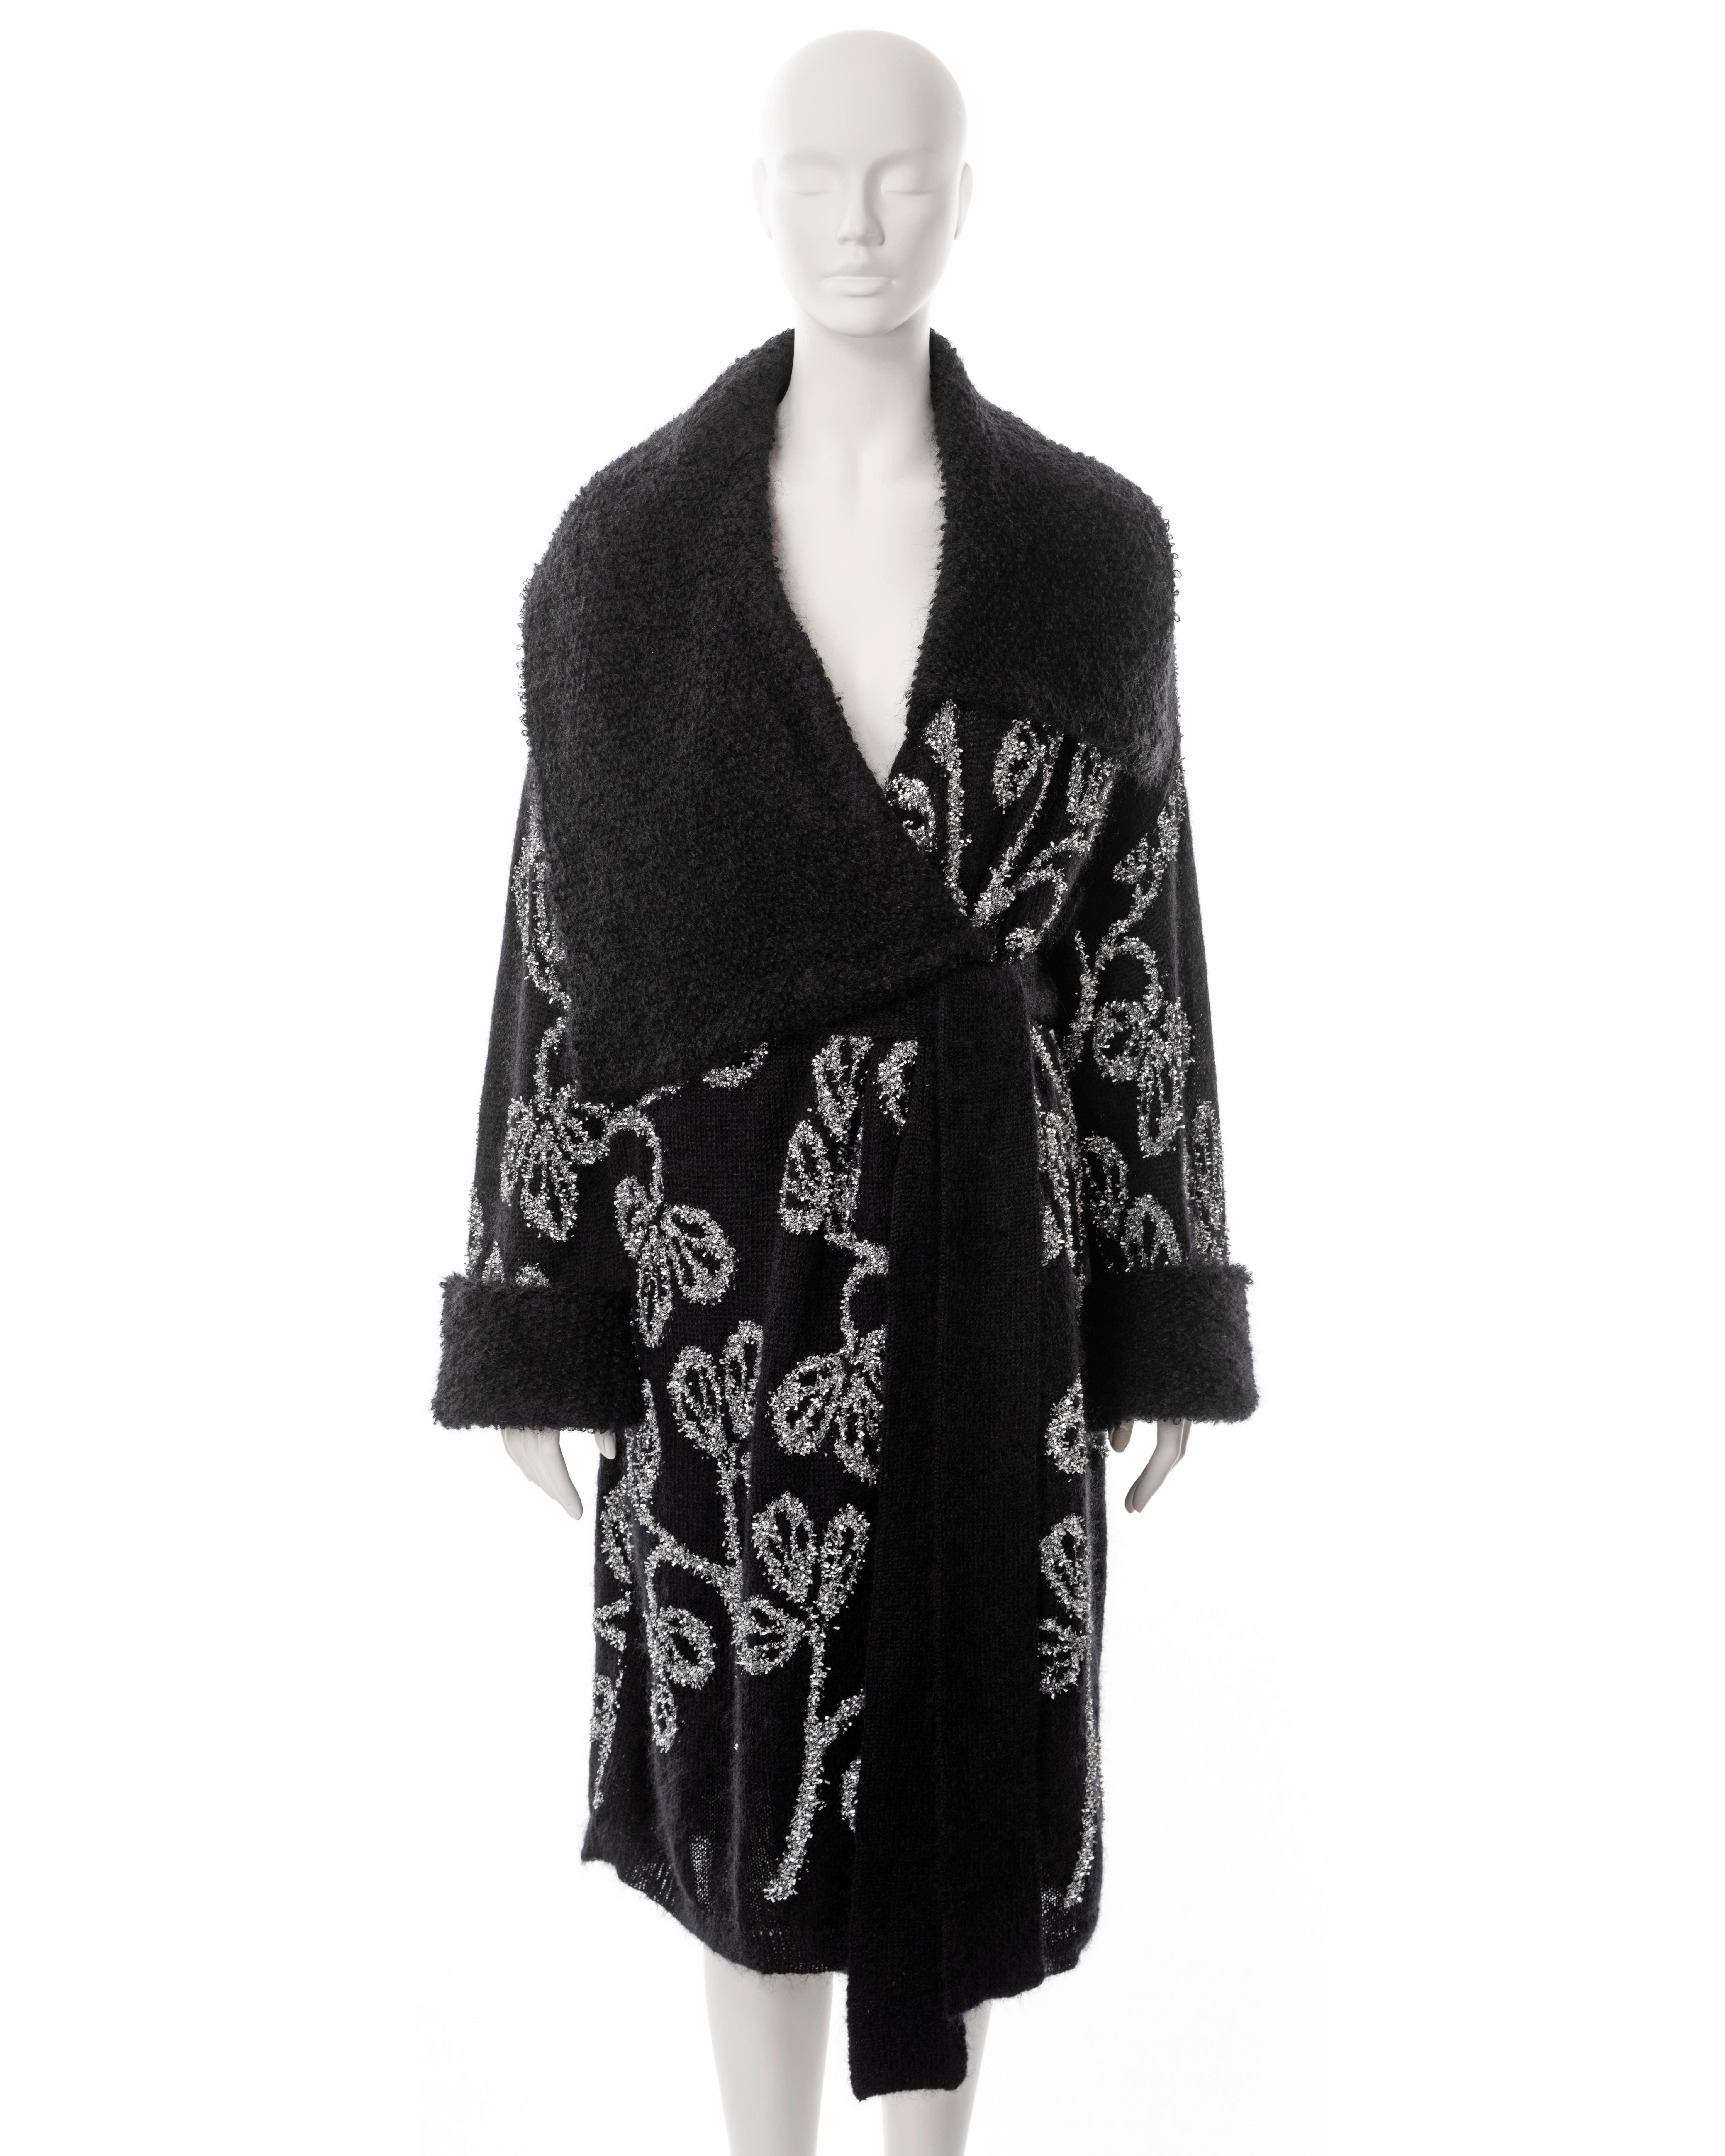 ▪ John Galliano black knitted wool cardigan 
▪ Sold by One of a Kind Archive
▪ Spring-Summer 2003
▪ Silver tinsel embroidery in a floral motif 
▪ Large asymmetric collar 
▪ Self-fabric tie belt 
▪ Loose-fit 
▪ Size: approx. Medium

All photographs